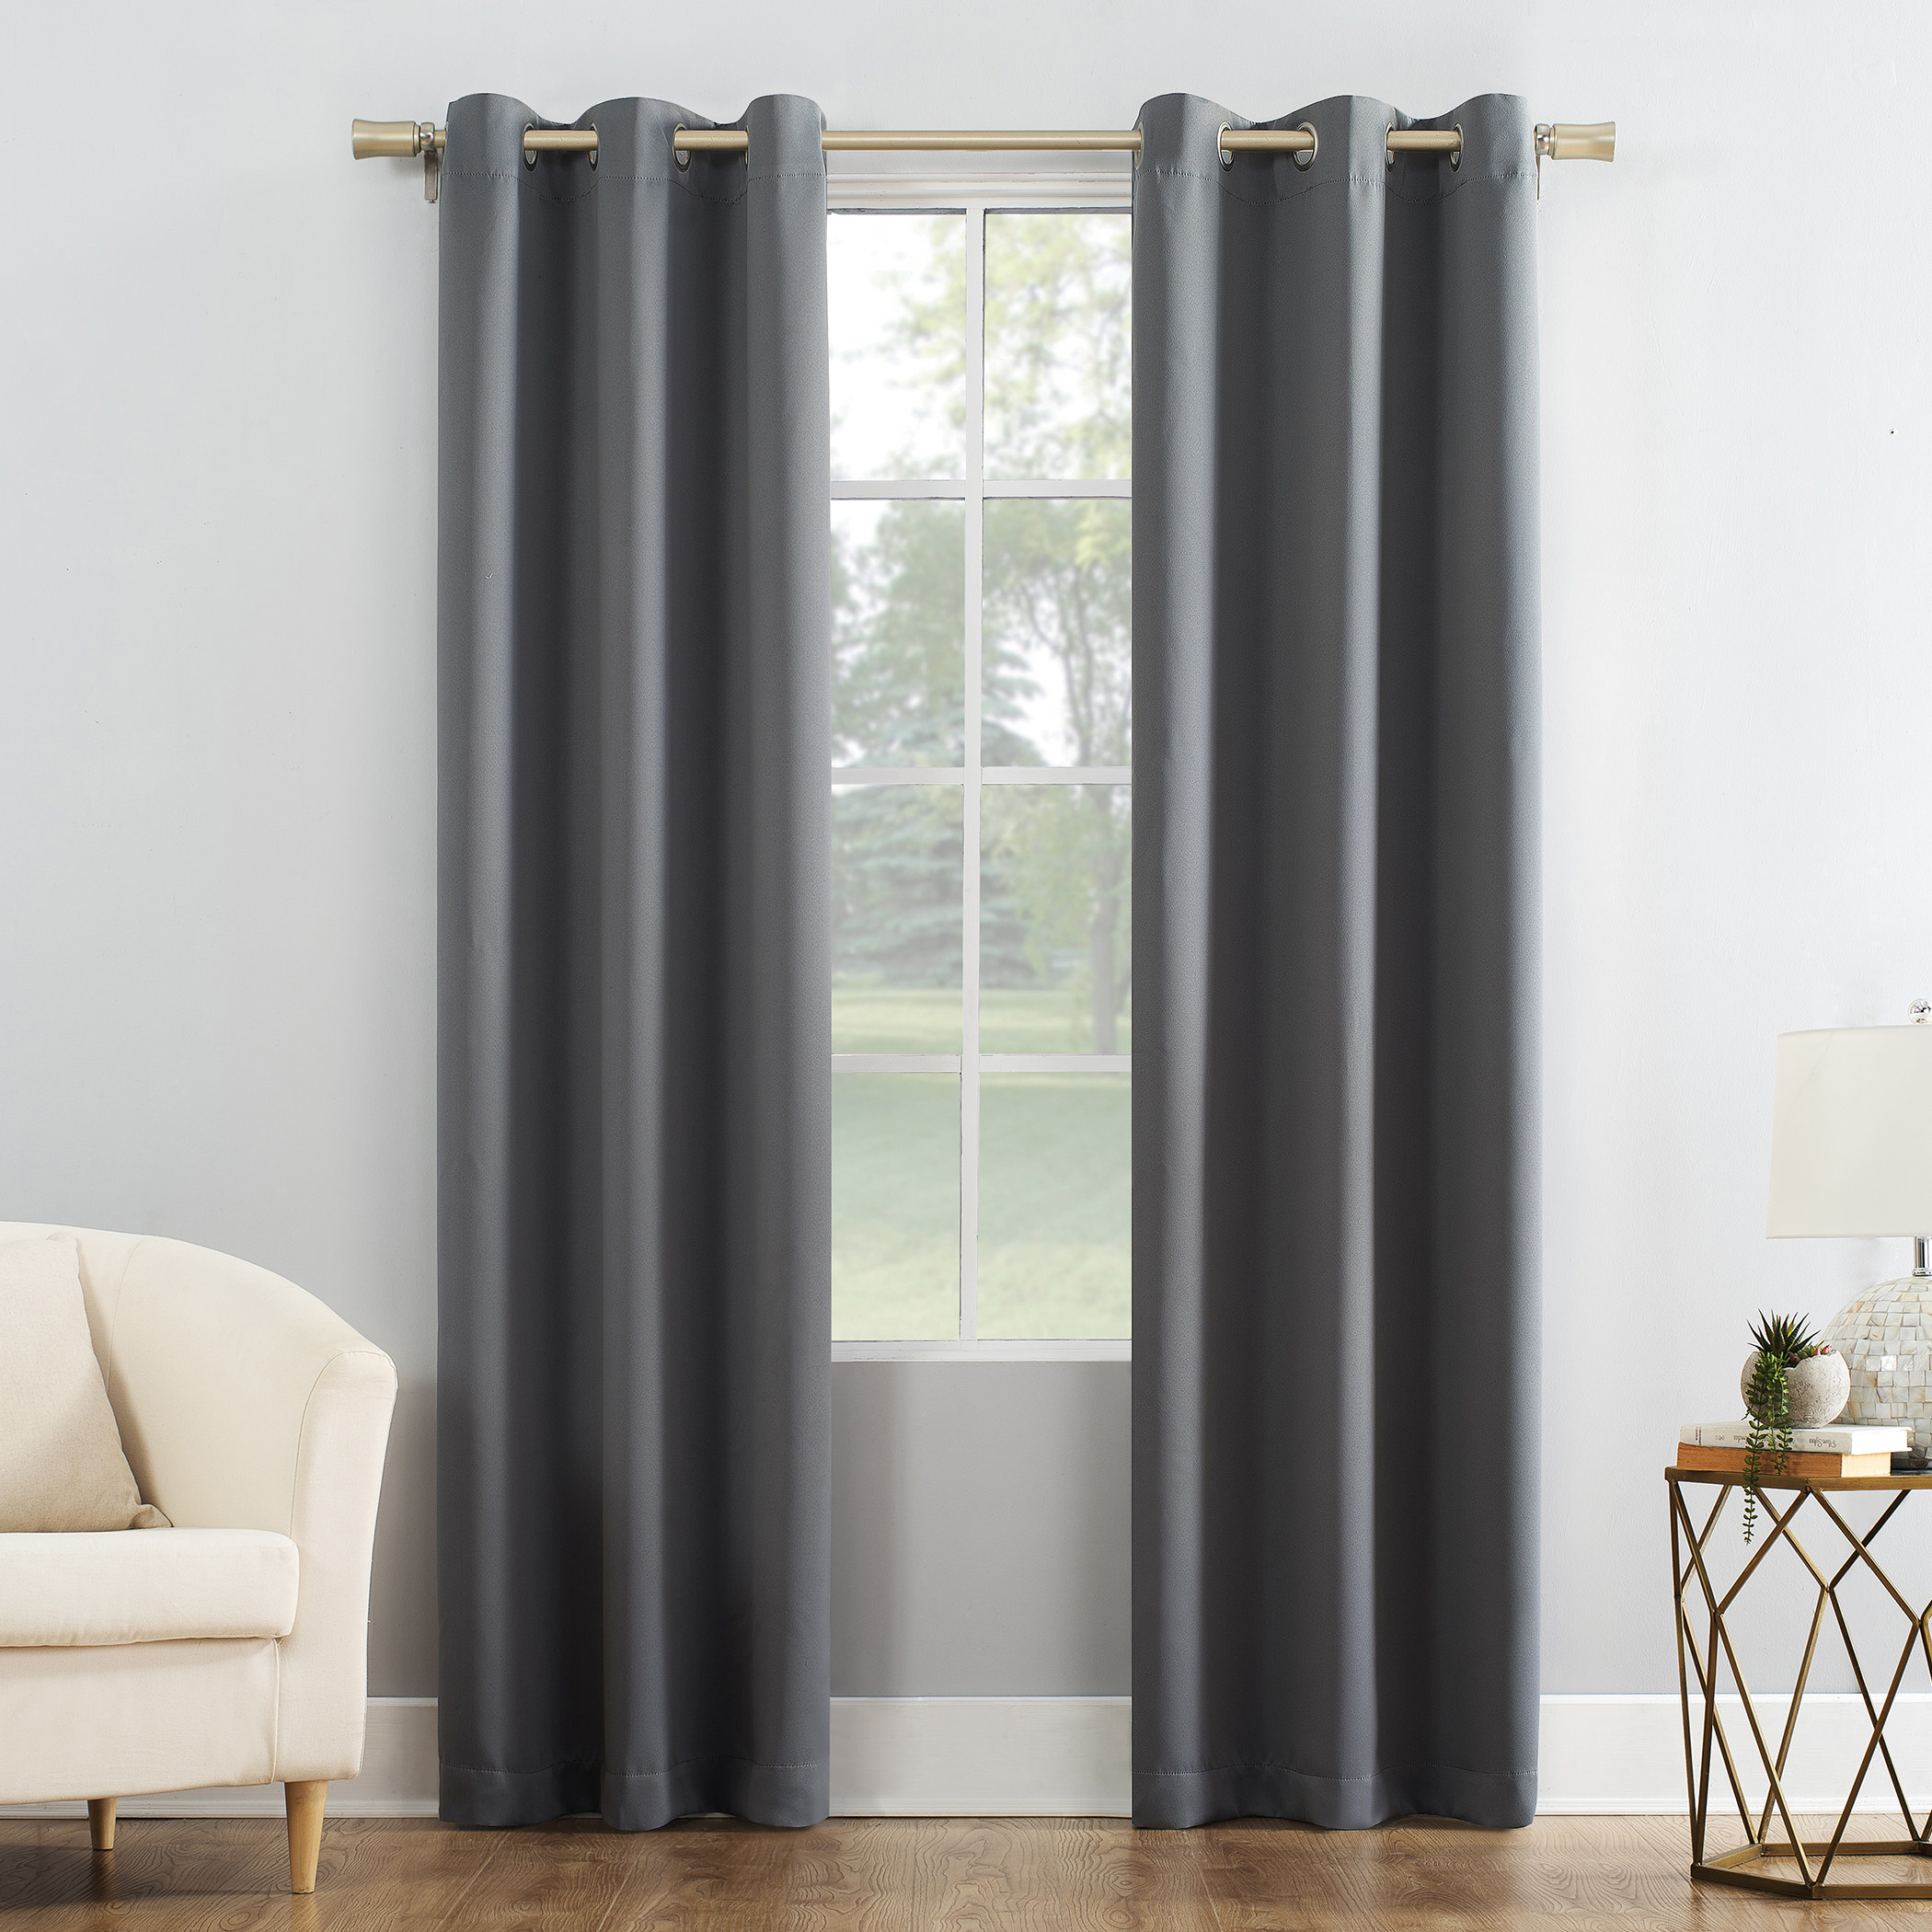 gray blackout curtains in front of a window